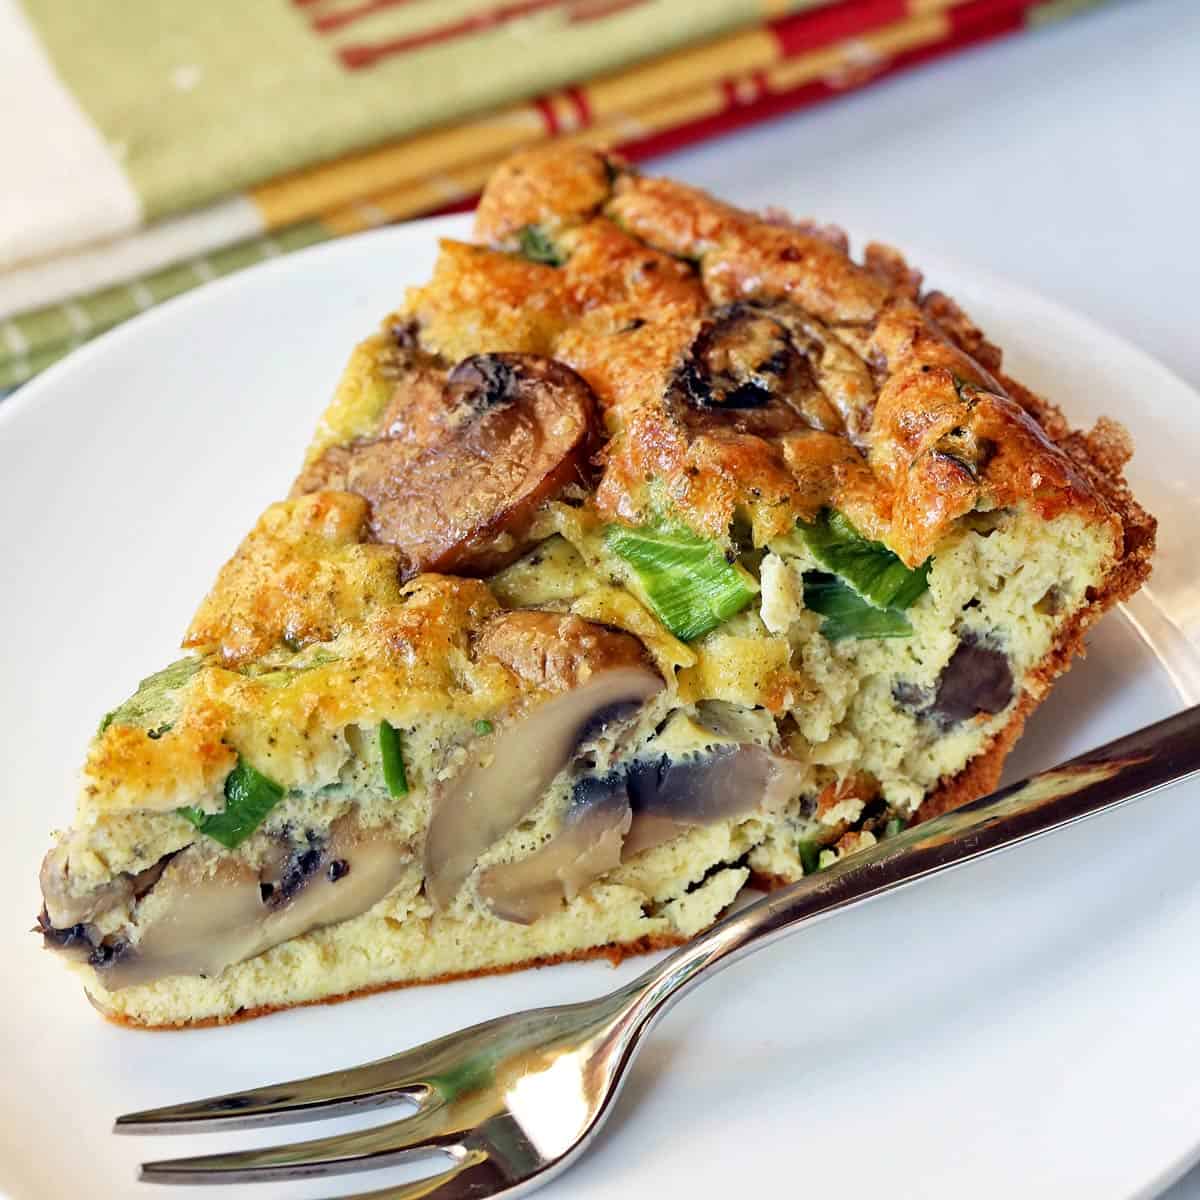 A slice of mushroom frittata is served with a fork.